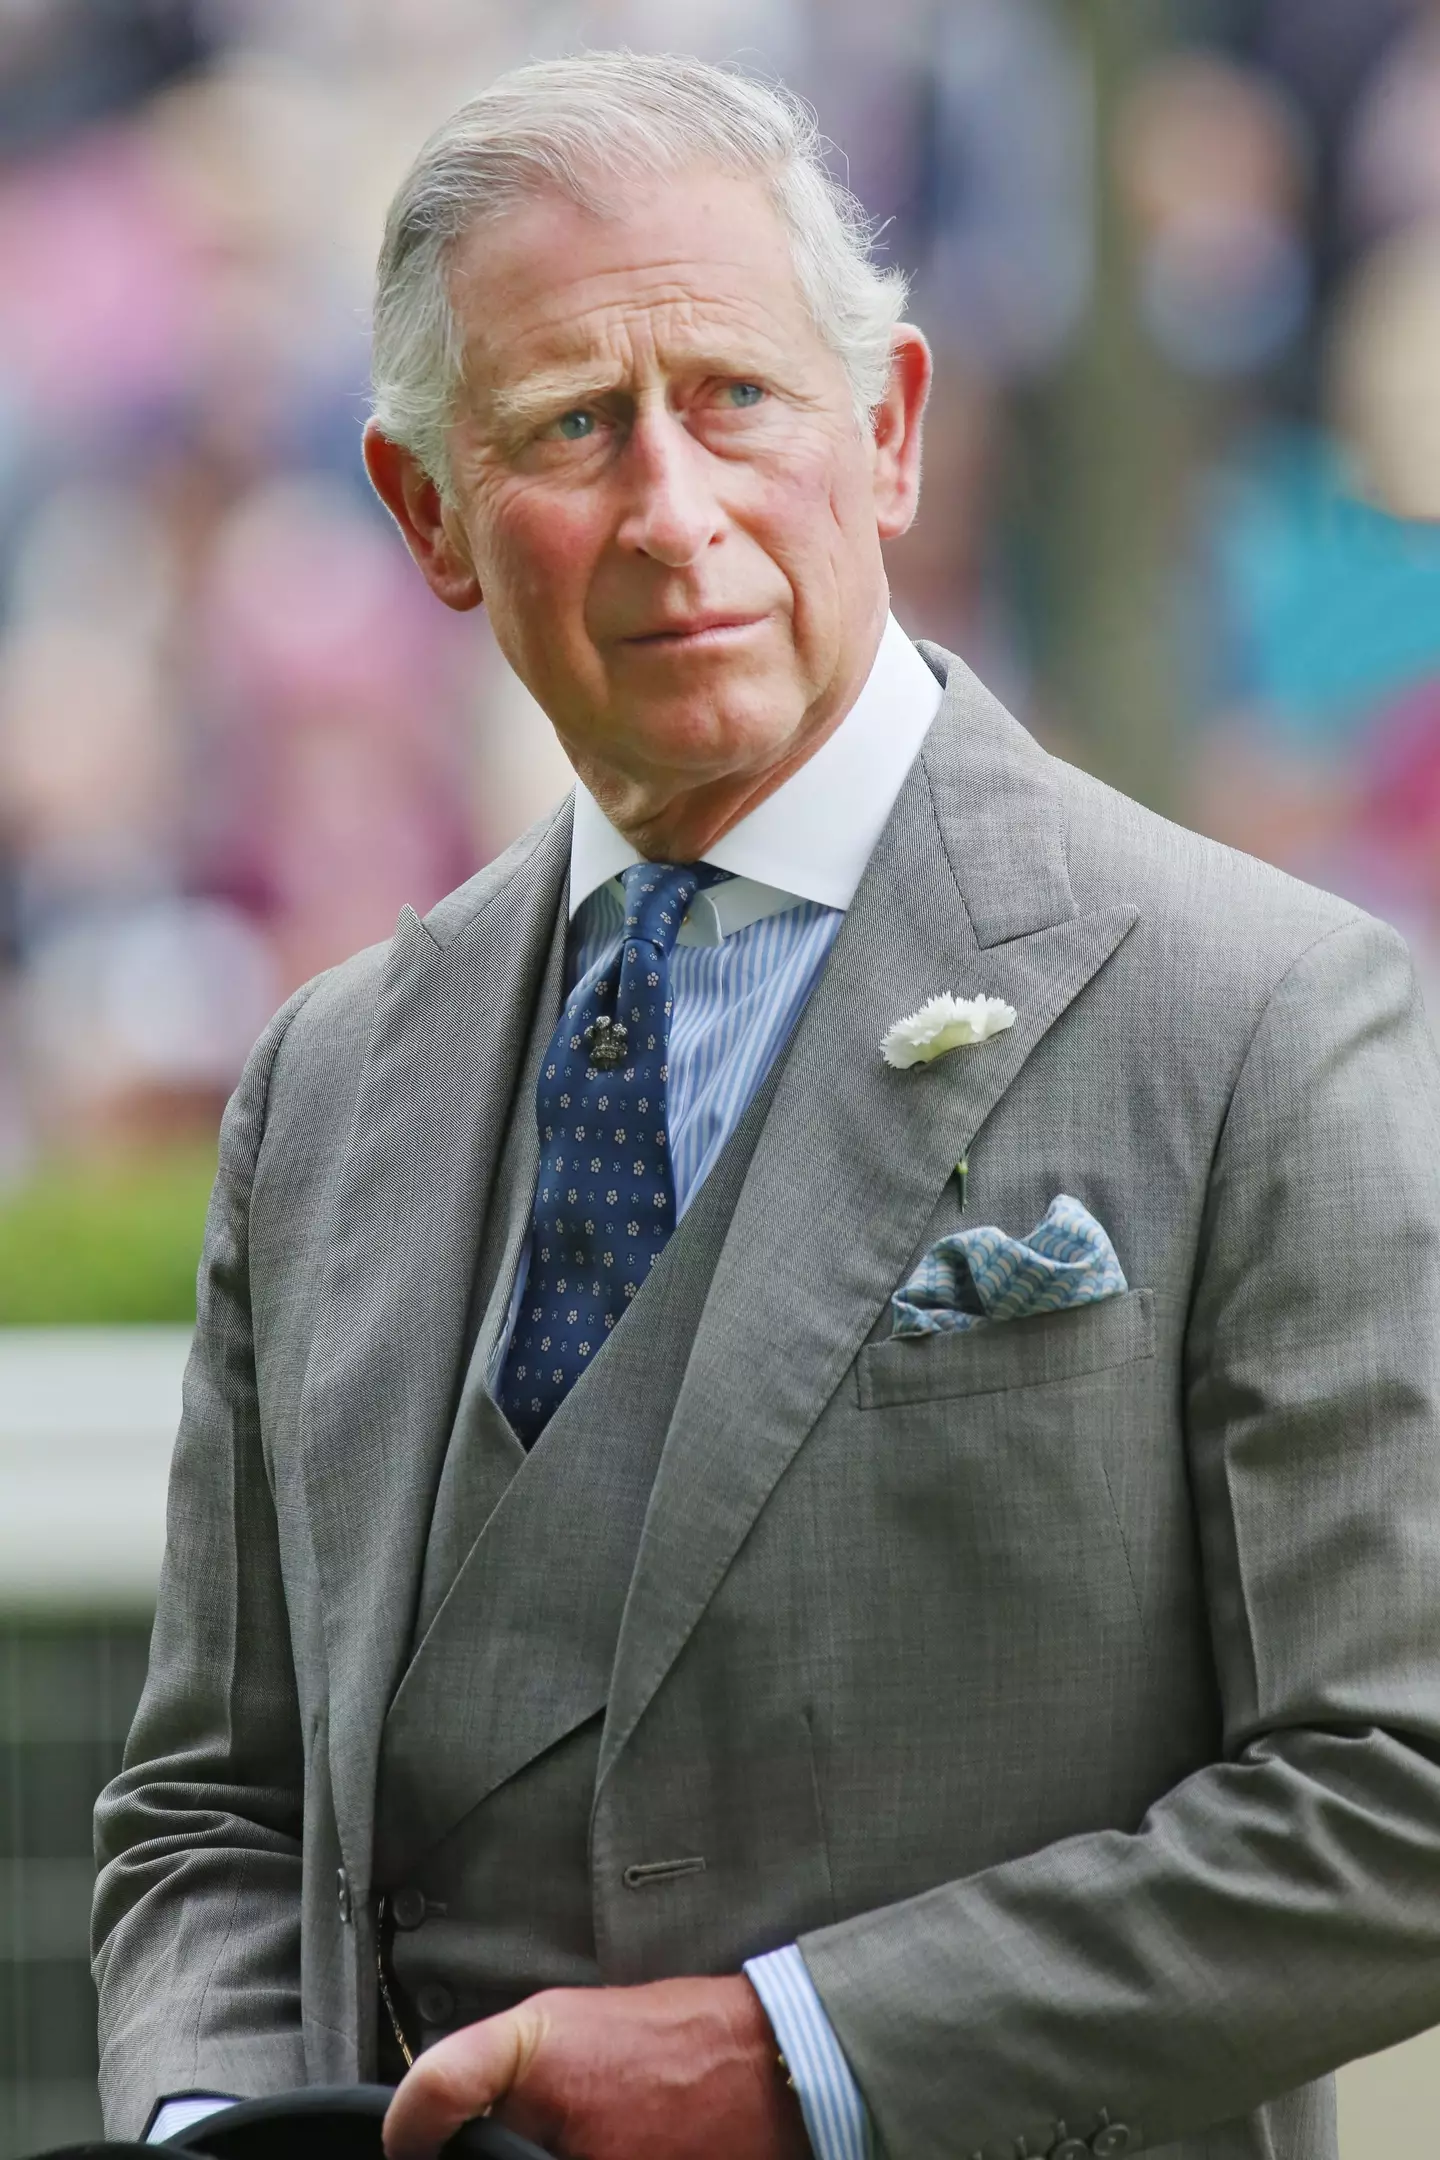 Prince Charles has travelled to Balmoral to be with the Queen.